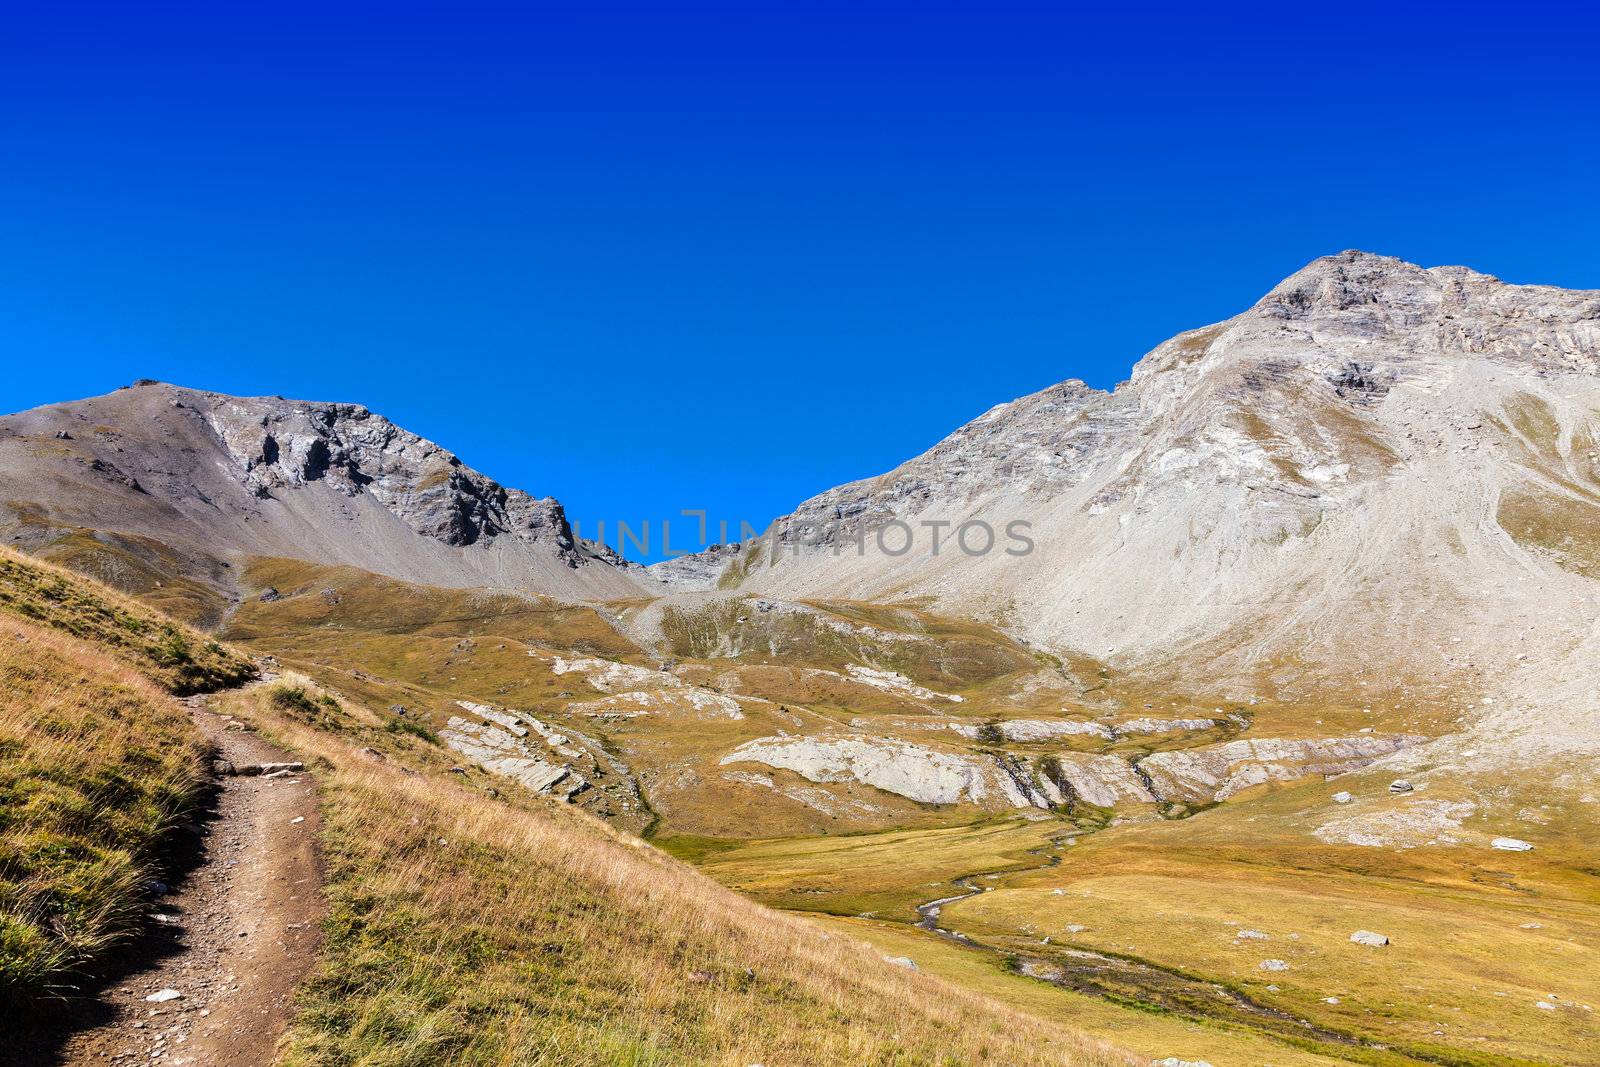 Footpath in the Mountains by RazvanPhotography